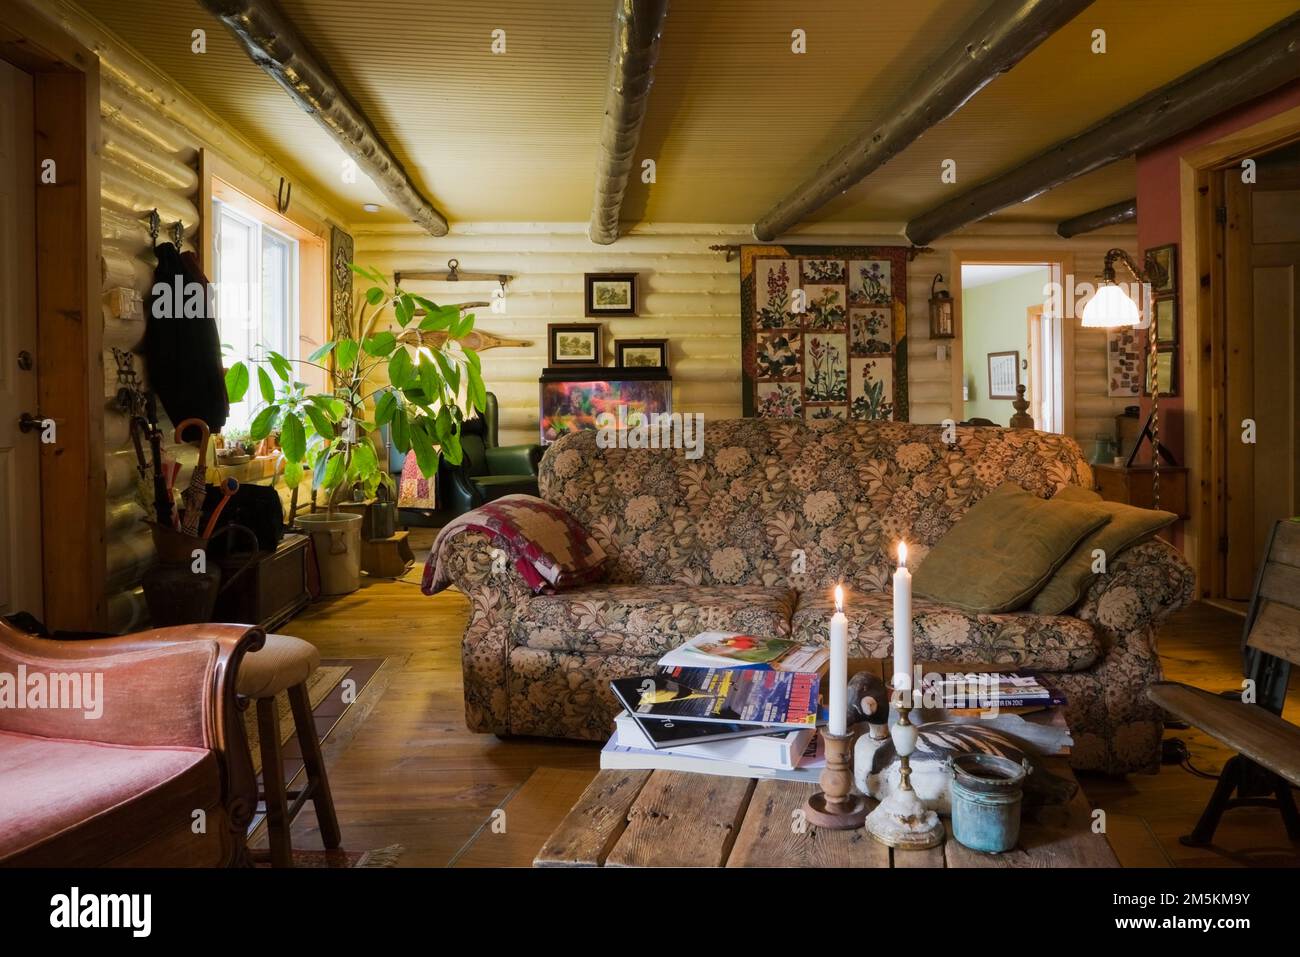 Old upholstered sofa and furnishings in living room inside country cottage  style log home, Quebec, Canada. This image is property released. CUPR0246  Stock Photo - Alamy